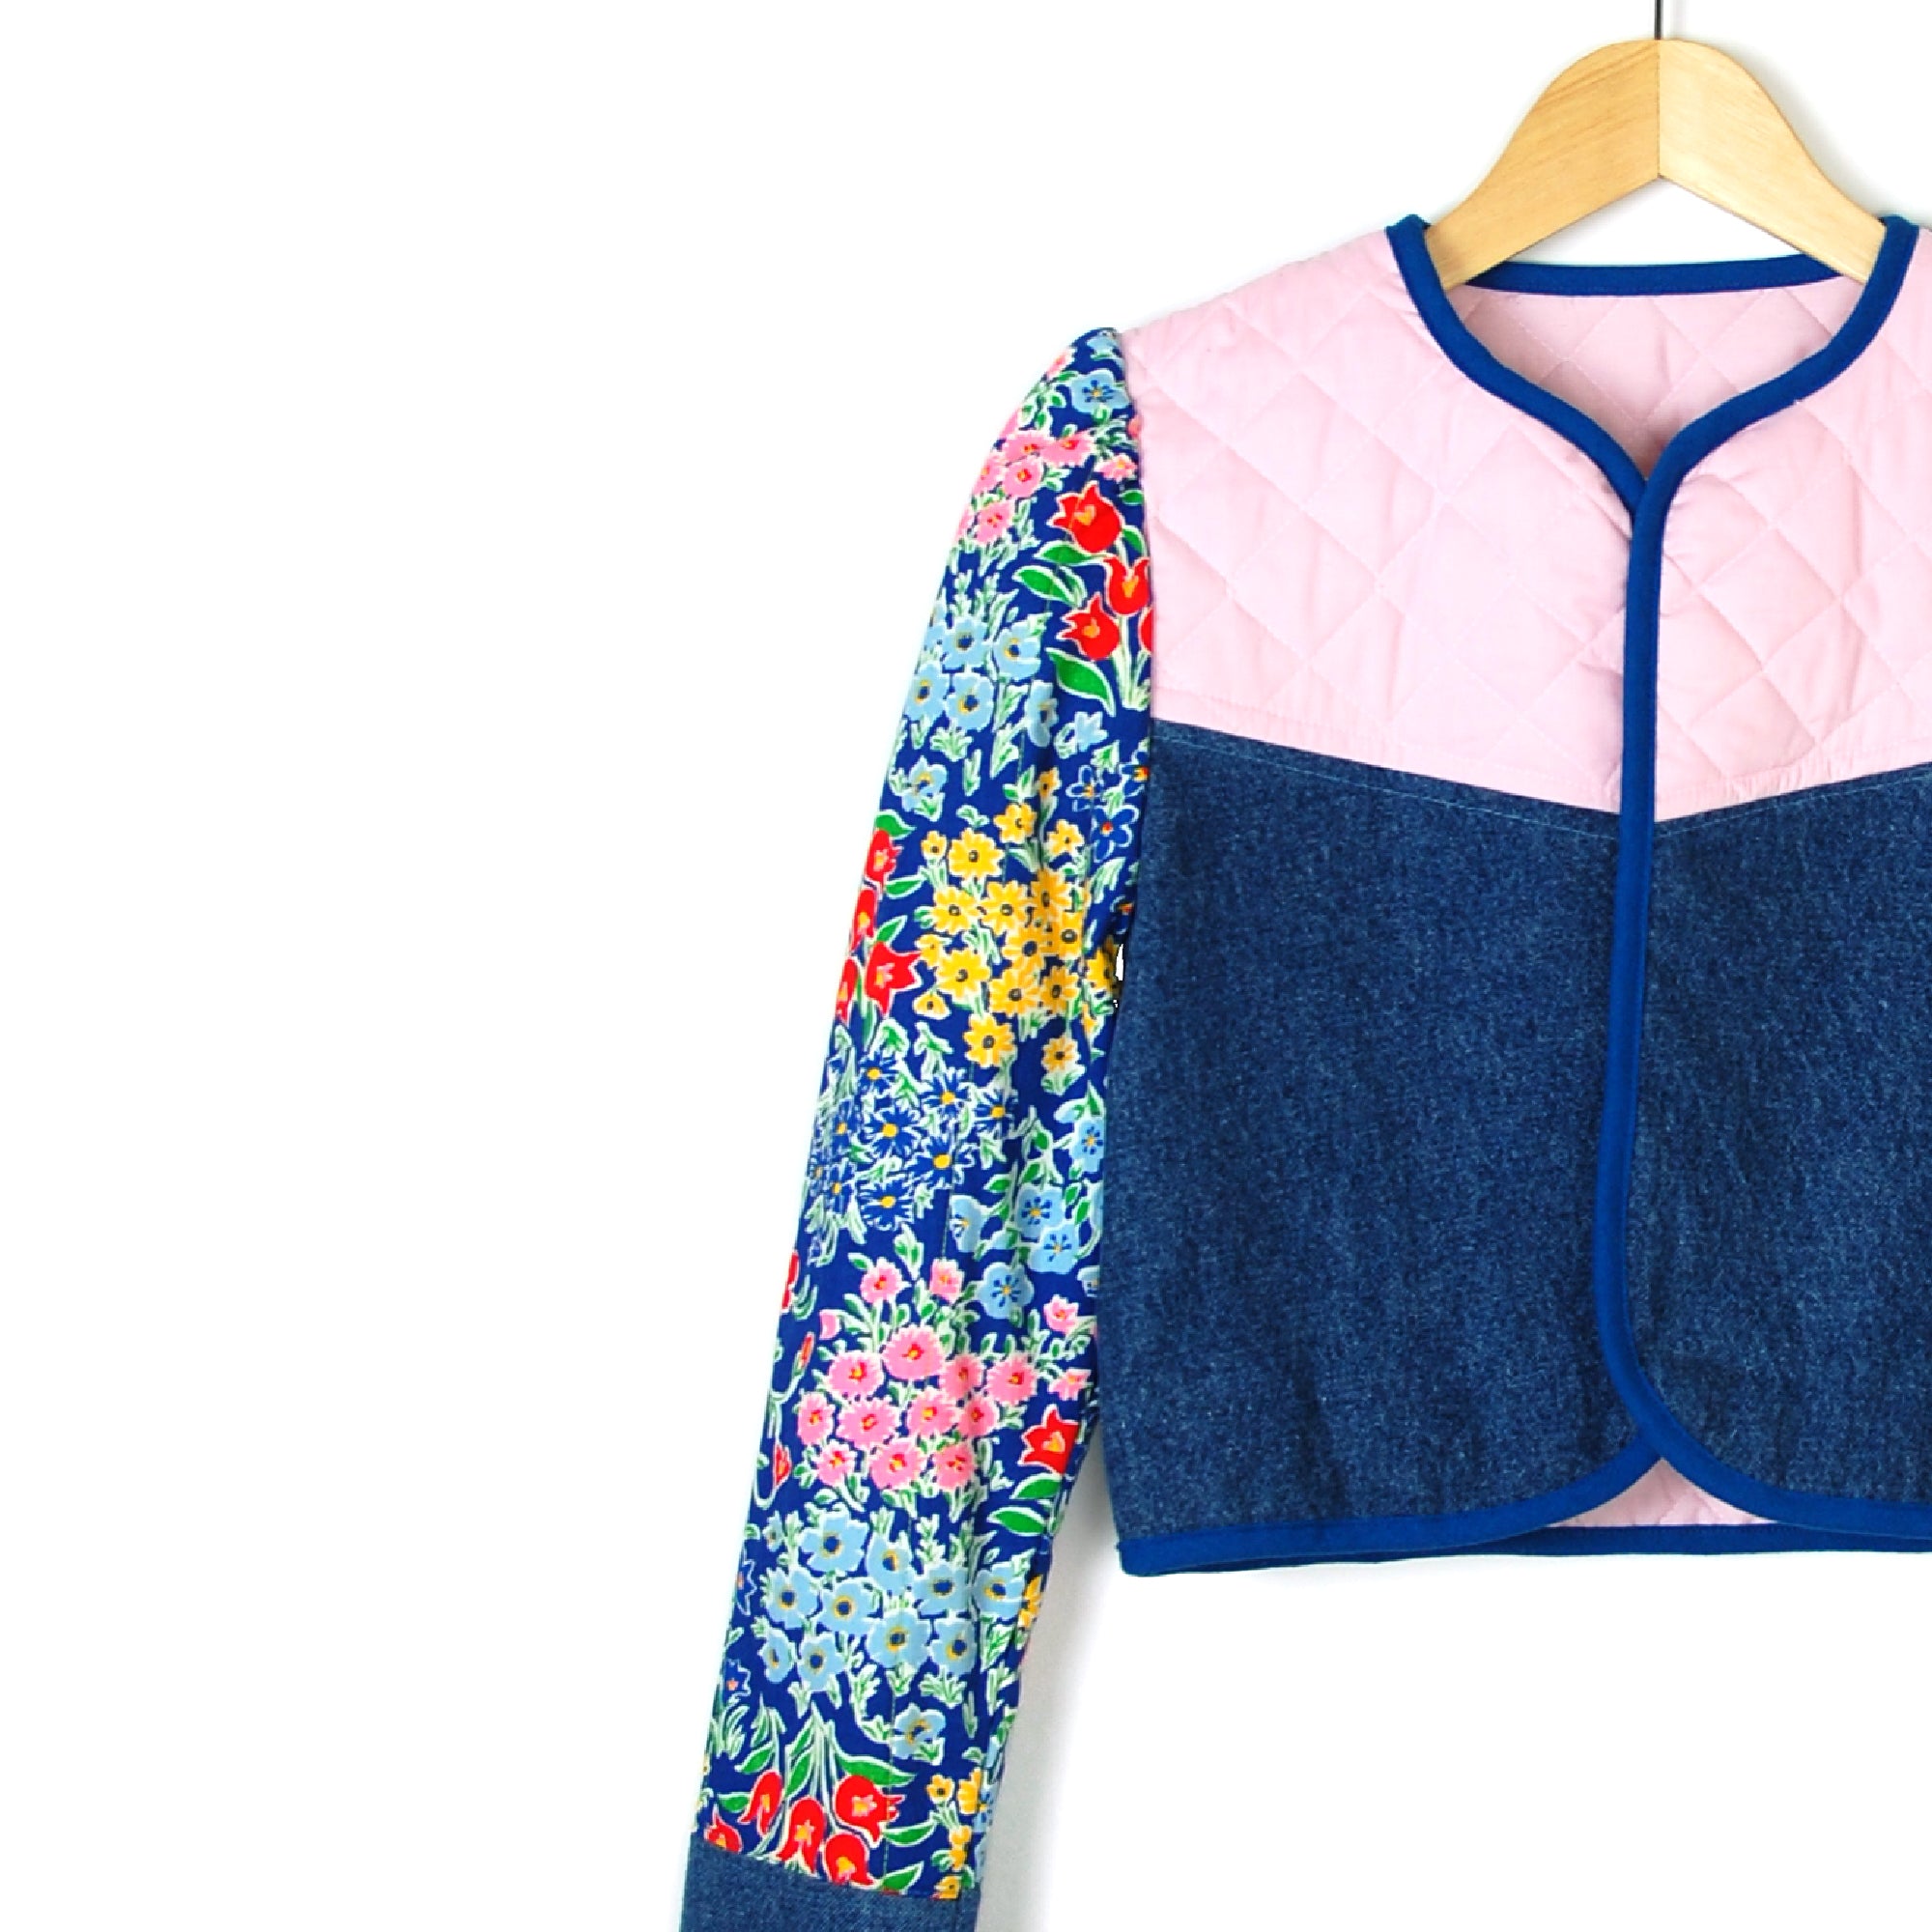 THE LONELY DOLL QUILTED JACKET - Late to the Party